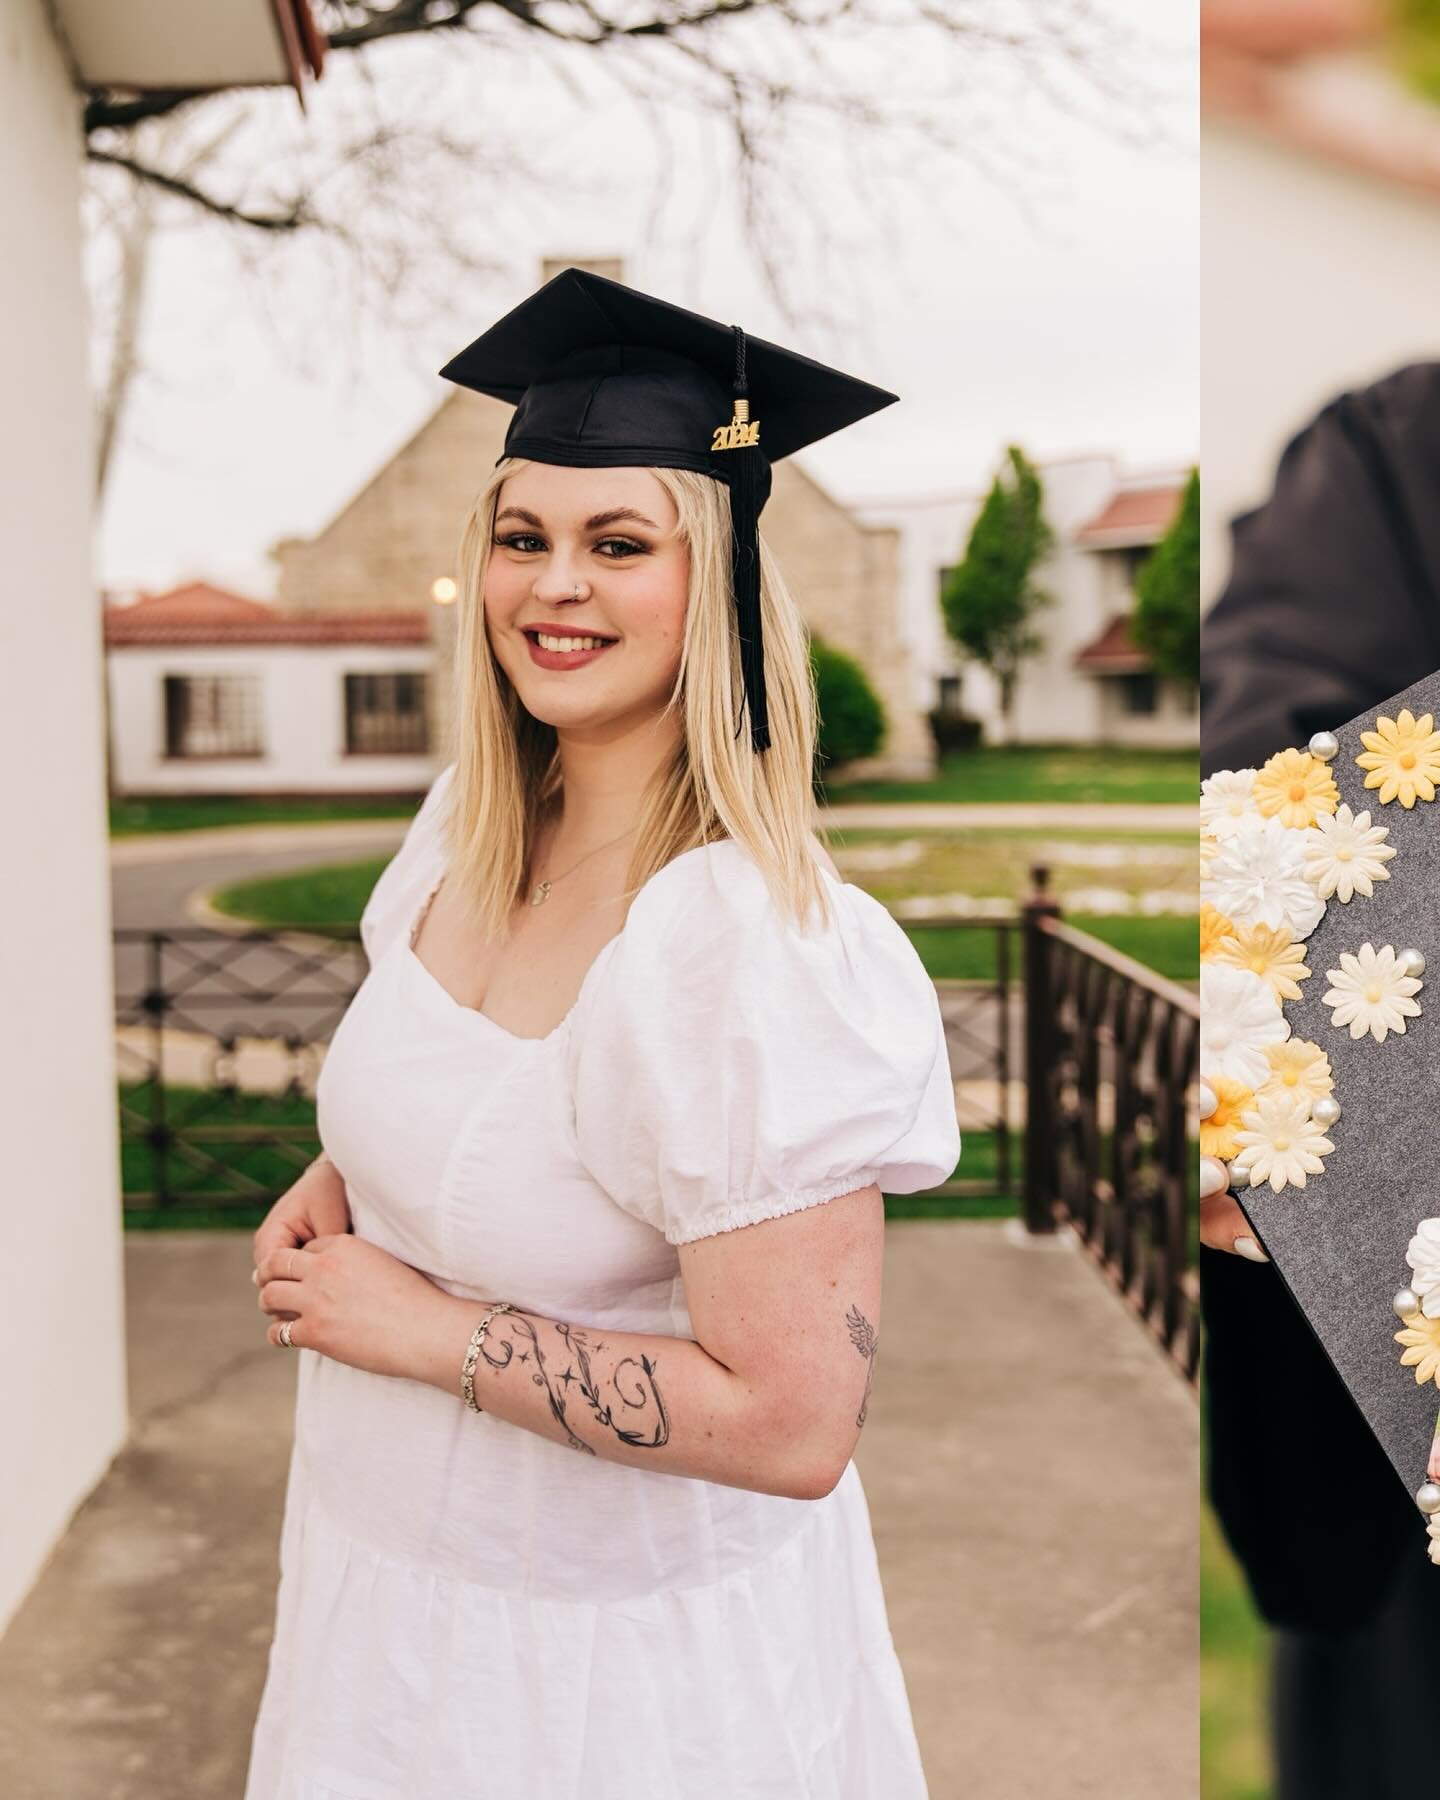 Congrats @briarirvin on your criminal justice degree from WSU! Great to catch up with you since your senior photo session! 🖤💛